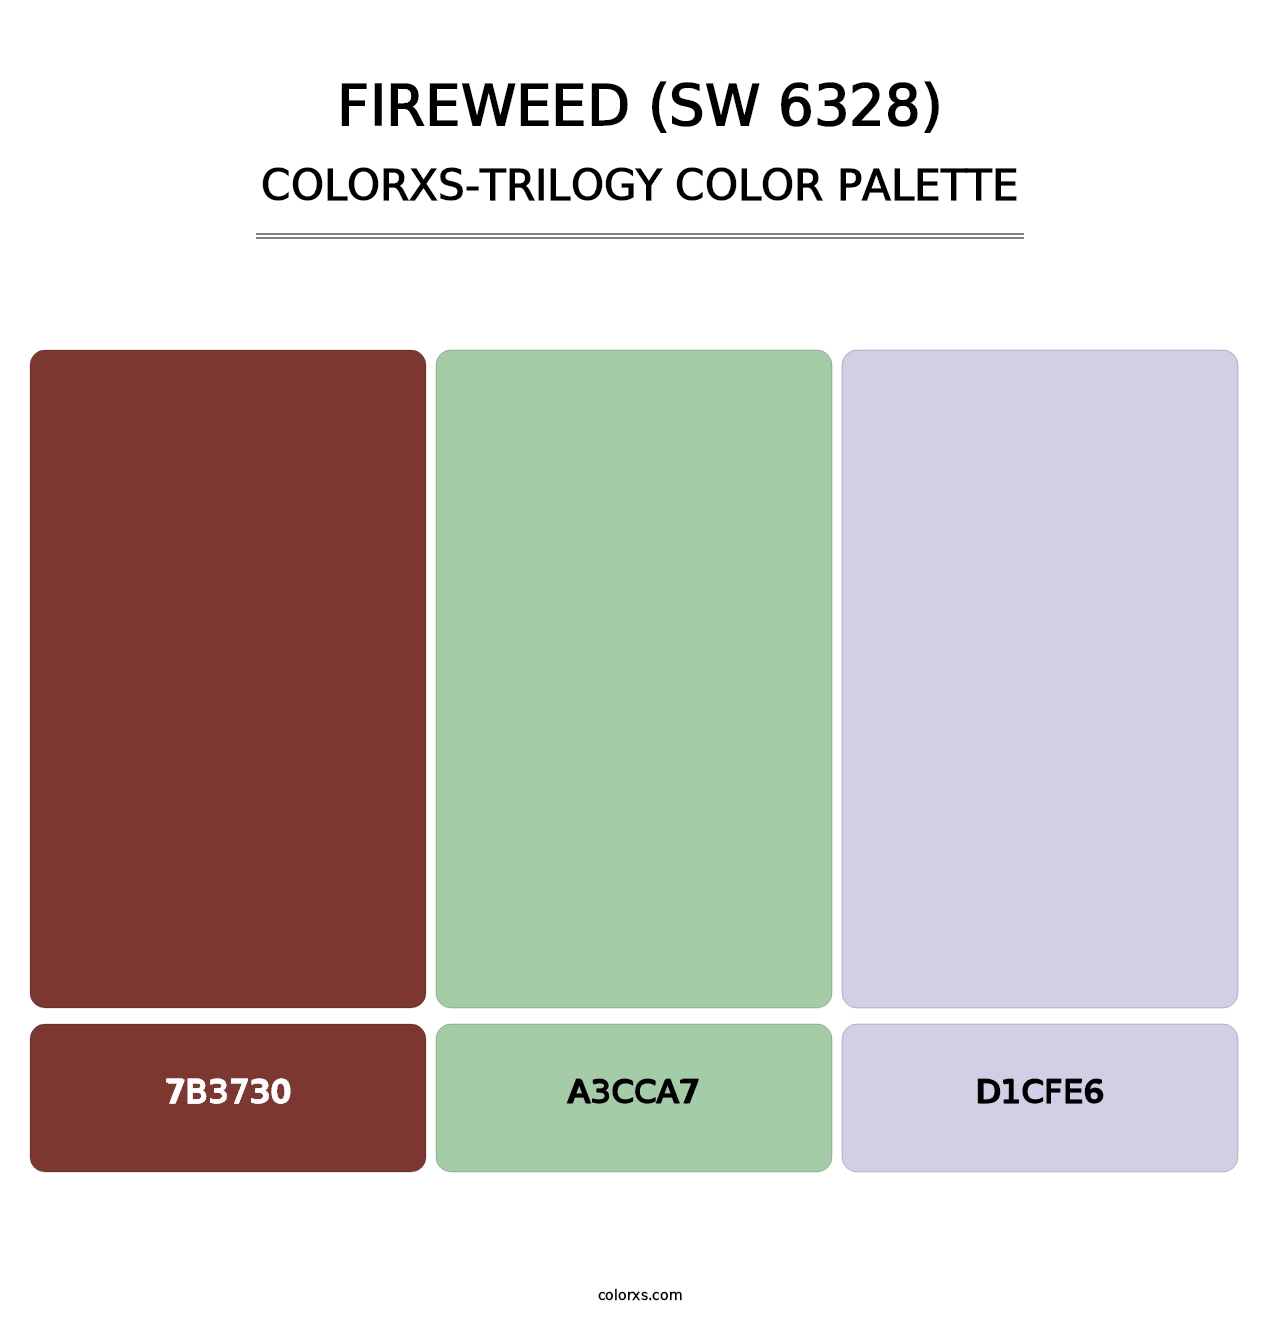 Fireweed (SW 6328) - Colorxs Trilogy Palette